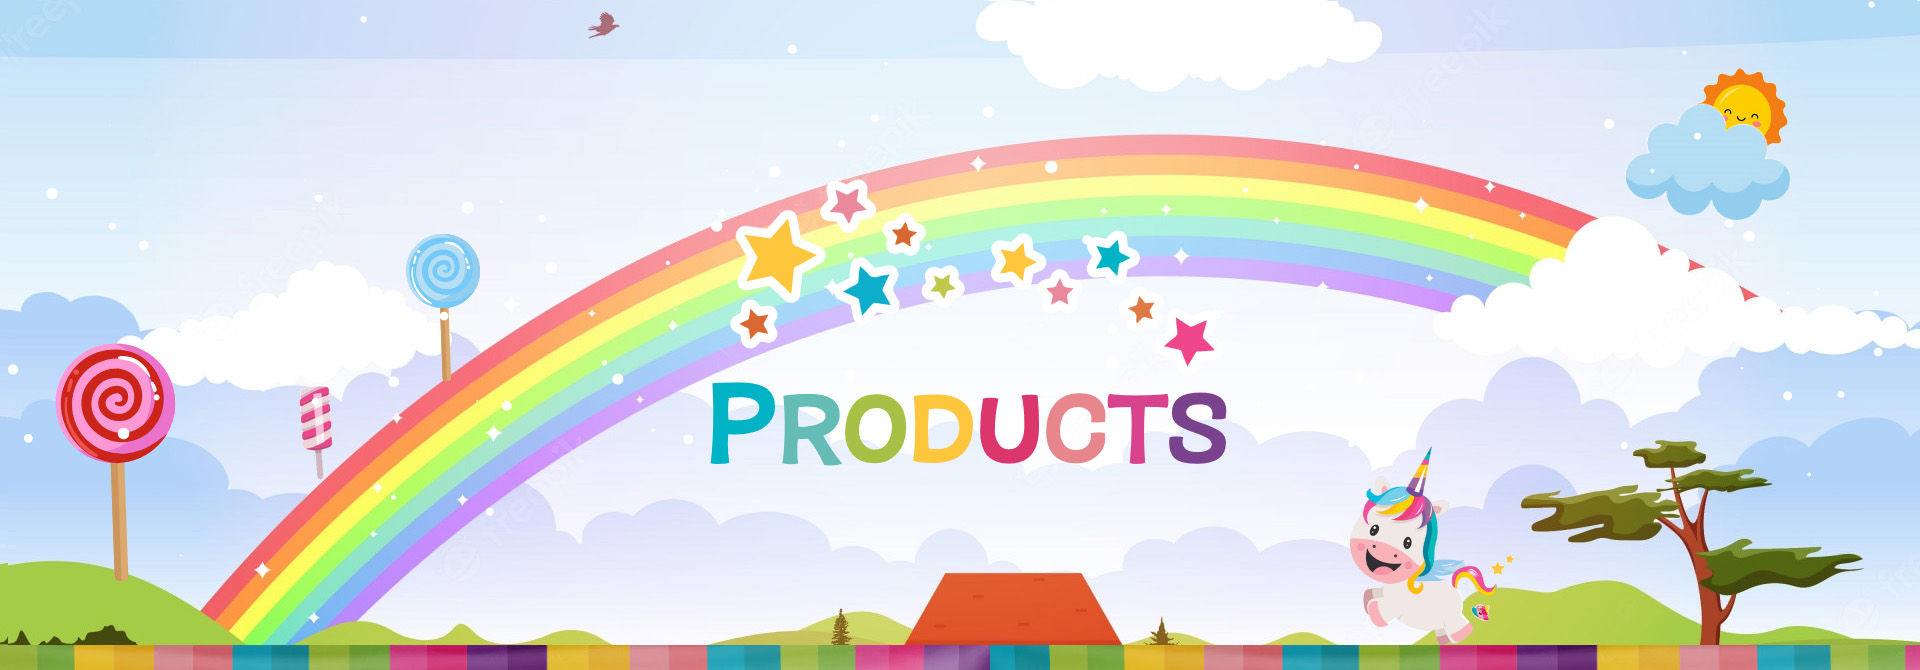 Product-banner